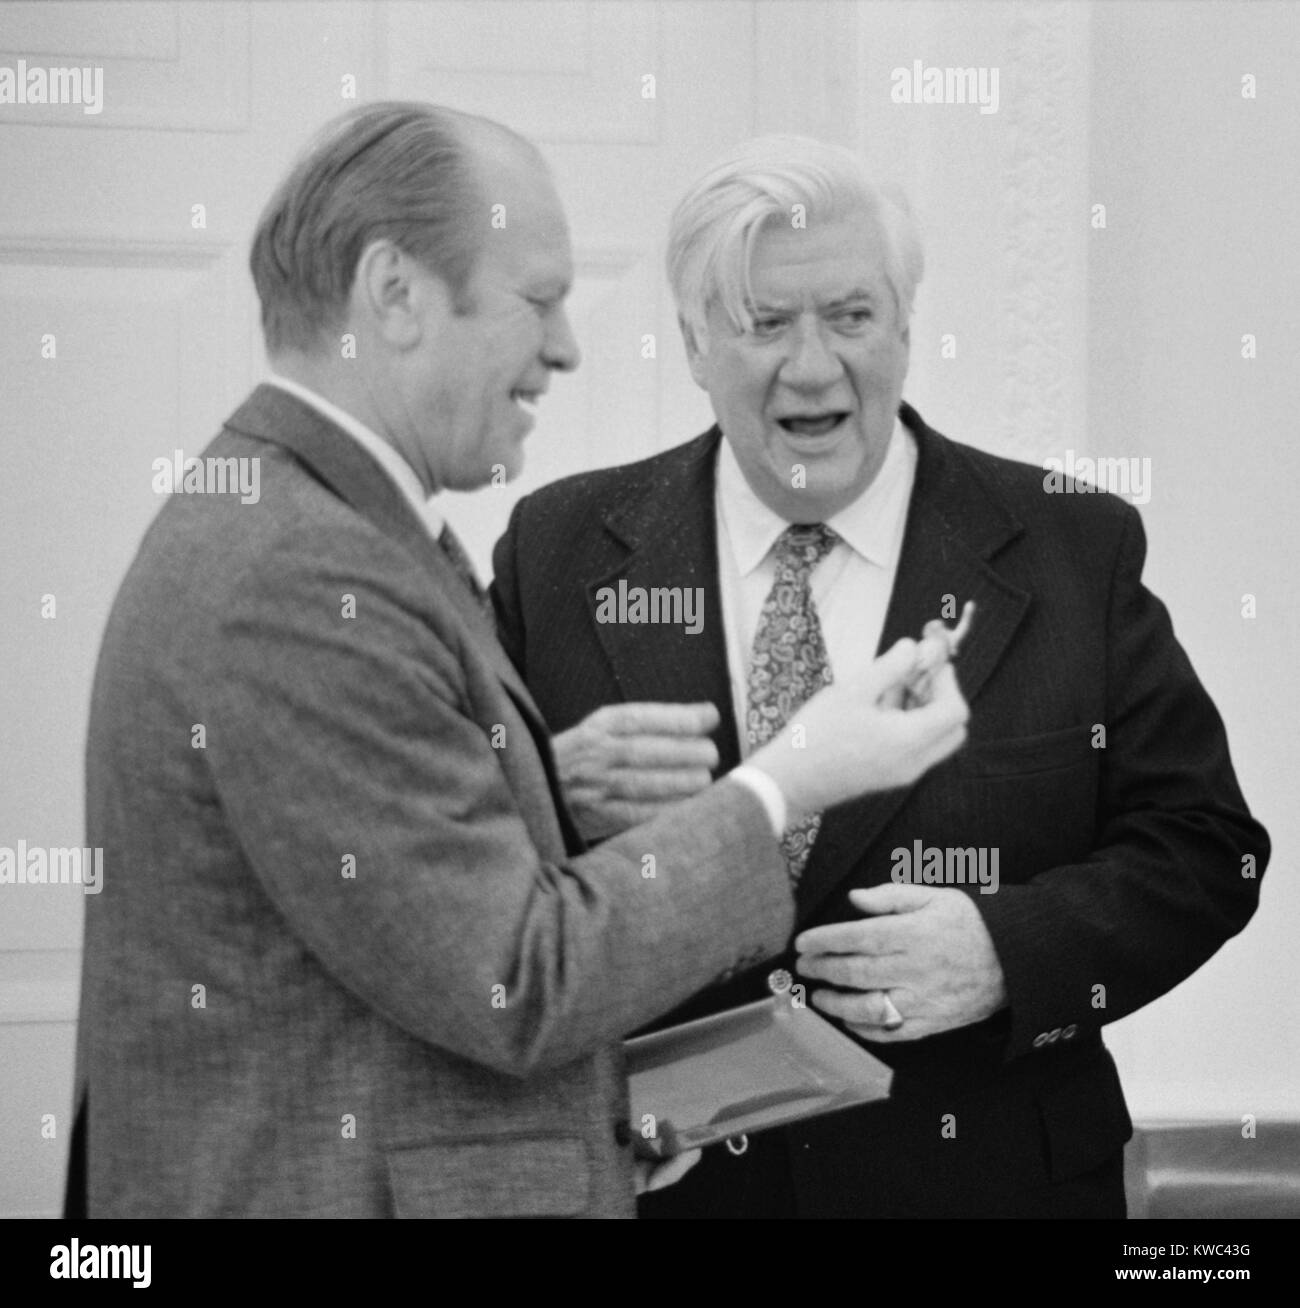 President Gerald Ford meeting with Tip O'Neill at the White House, Feb. 6, 1975. O'Neill was then Democratic House Majority Leader, and served as Speaker of the House from 1977-87. (BSLOC 2015 14 58) Stock Photo